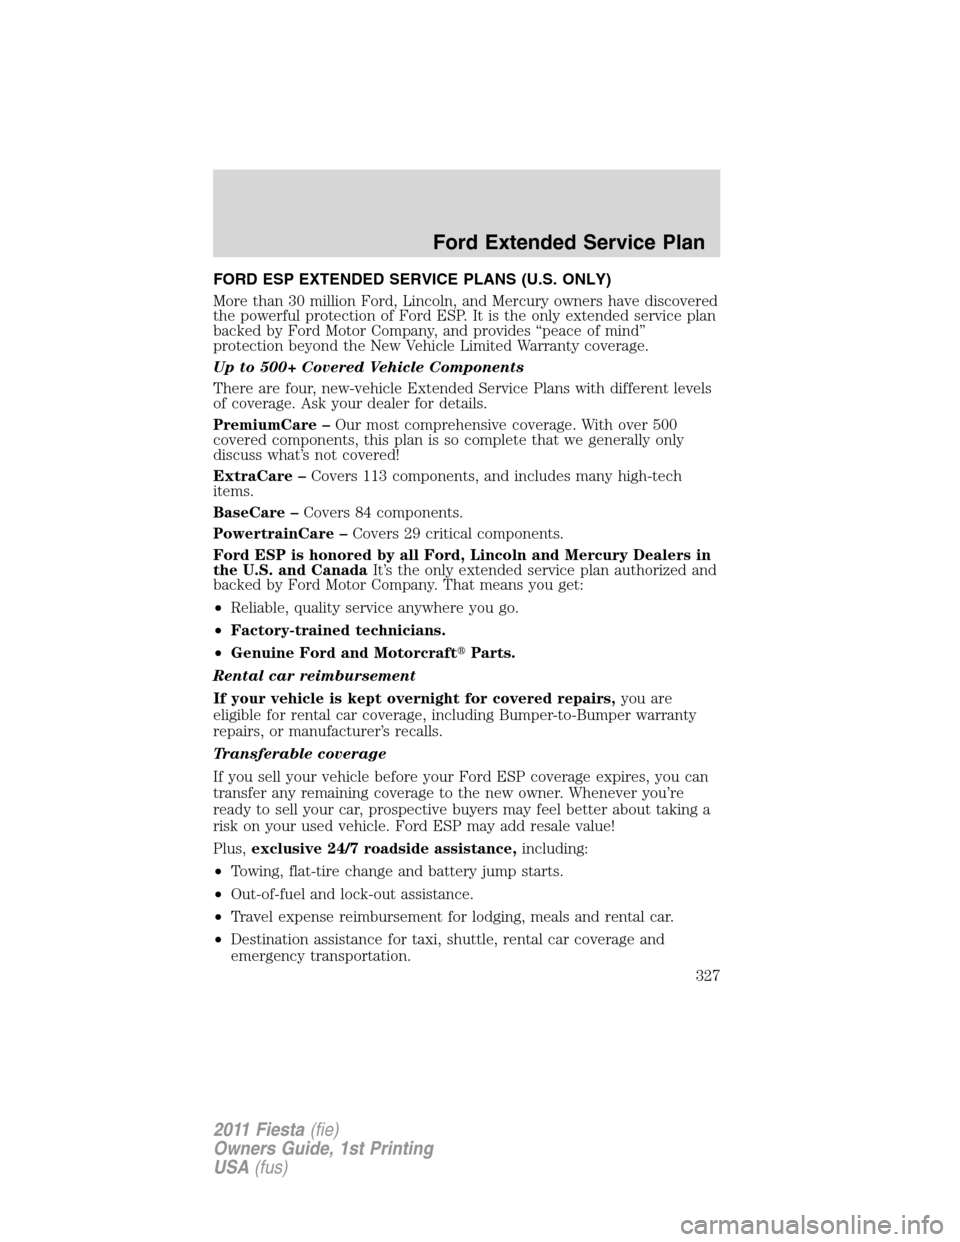 FORD FIESTA 2011 6.G Owners Manual FORD ESP EXTENDED SERVICE PLANS (U.S. ONLY)
More than 30 million Ford, Lincoln, and Mercury owners have discovered
the powerful protection of Ford ESP. It is the only extended service plan
backed by F